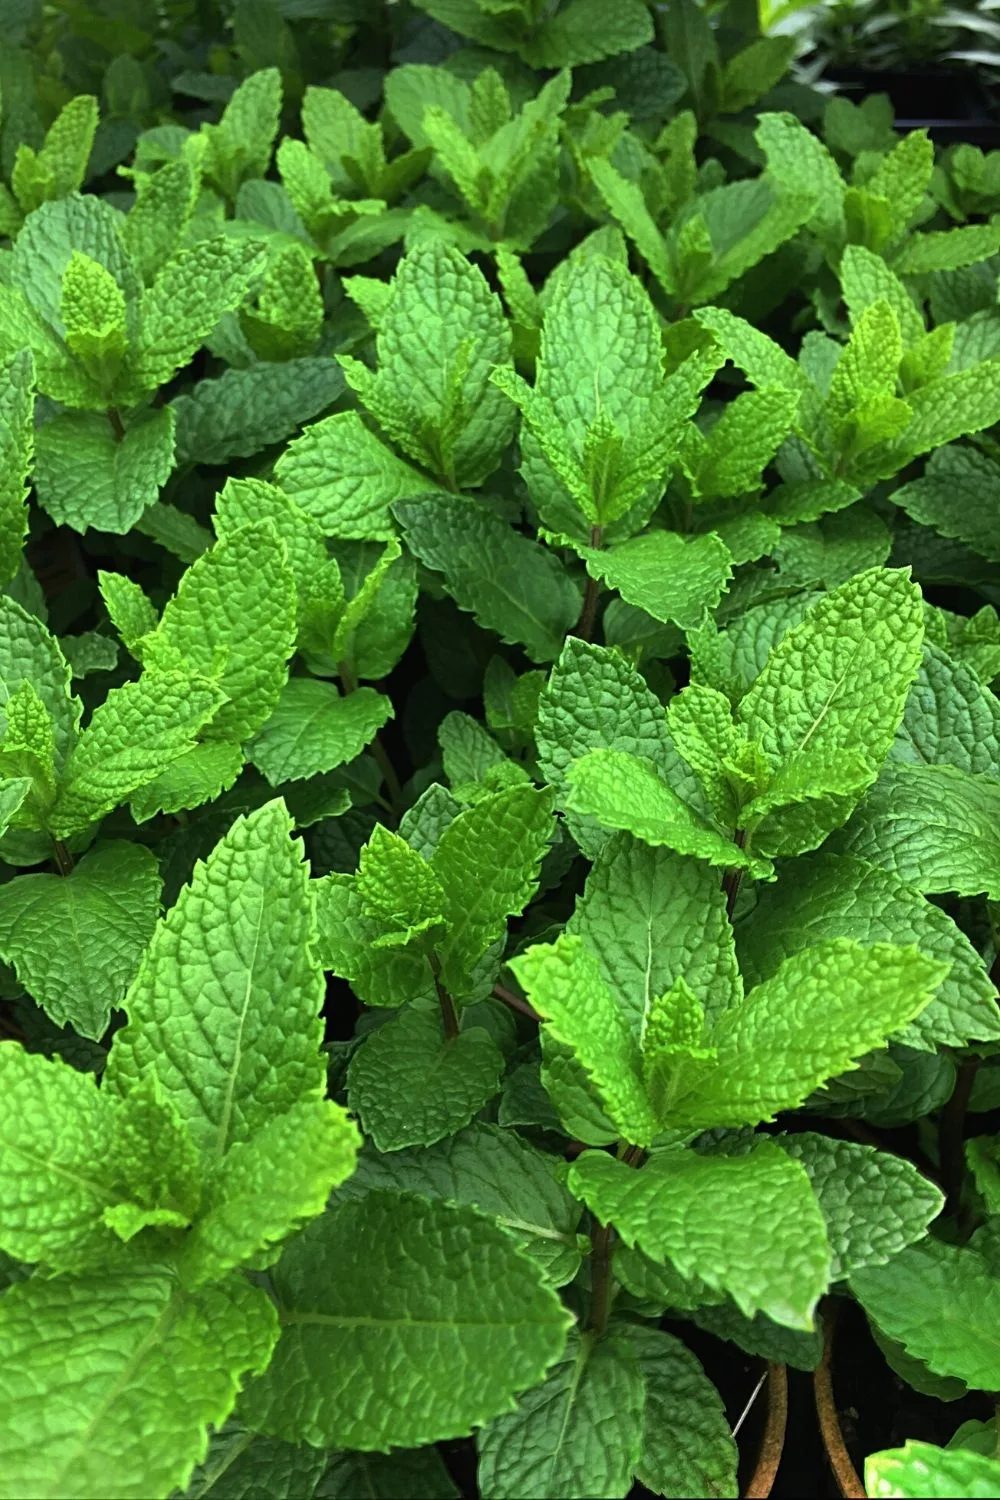 Whichever of the two Mint varieties you want to have, you can easily grow this herb on a south-facing balcony